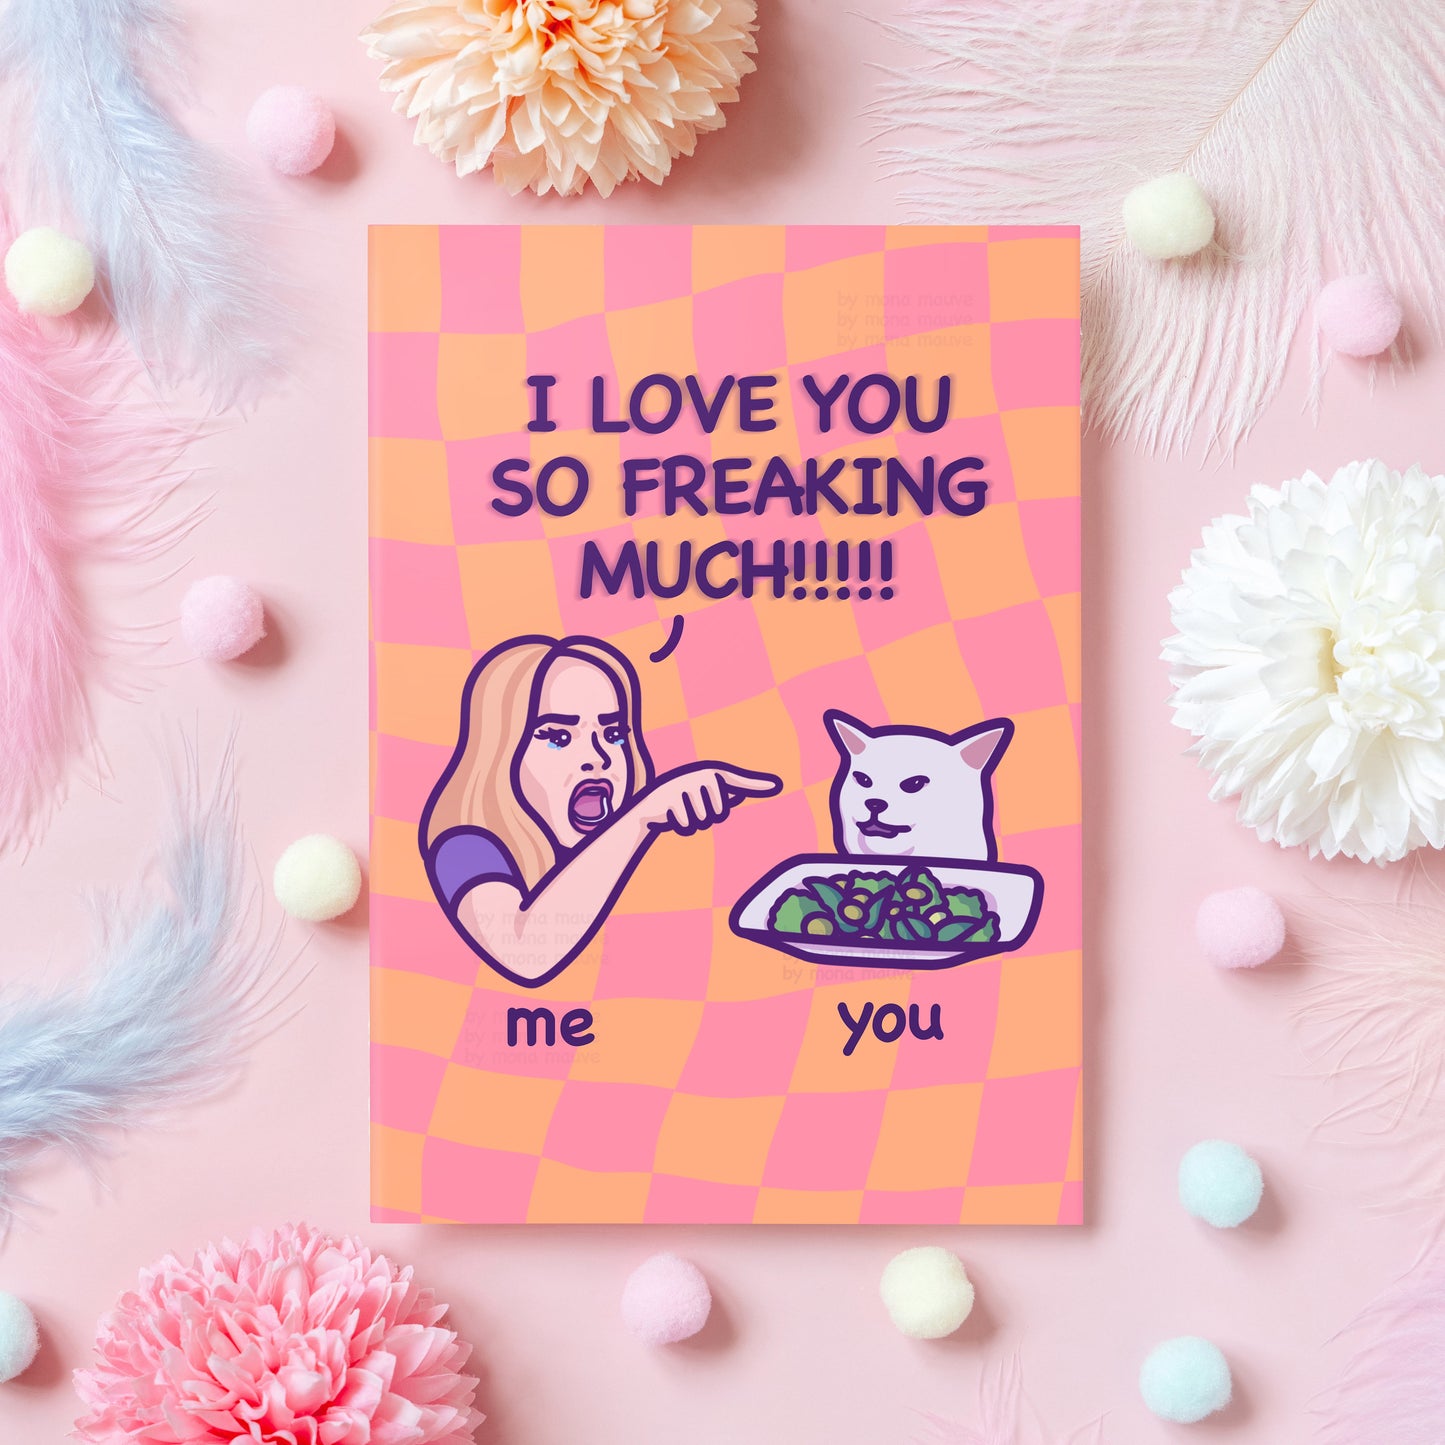 Funny Cat Meme Anniversary Card | I Love You So Freaking Much! | Woman Yelling at Cat Meme | For Boyfriend, Husband, Wife - Her or Him